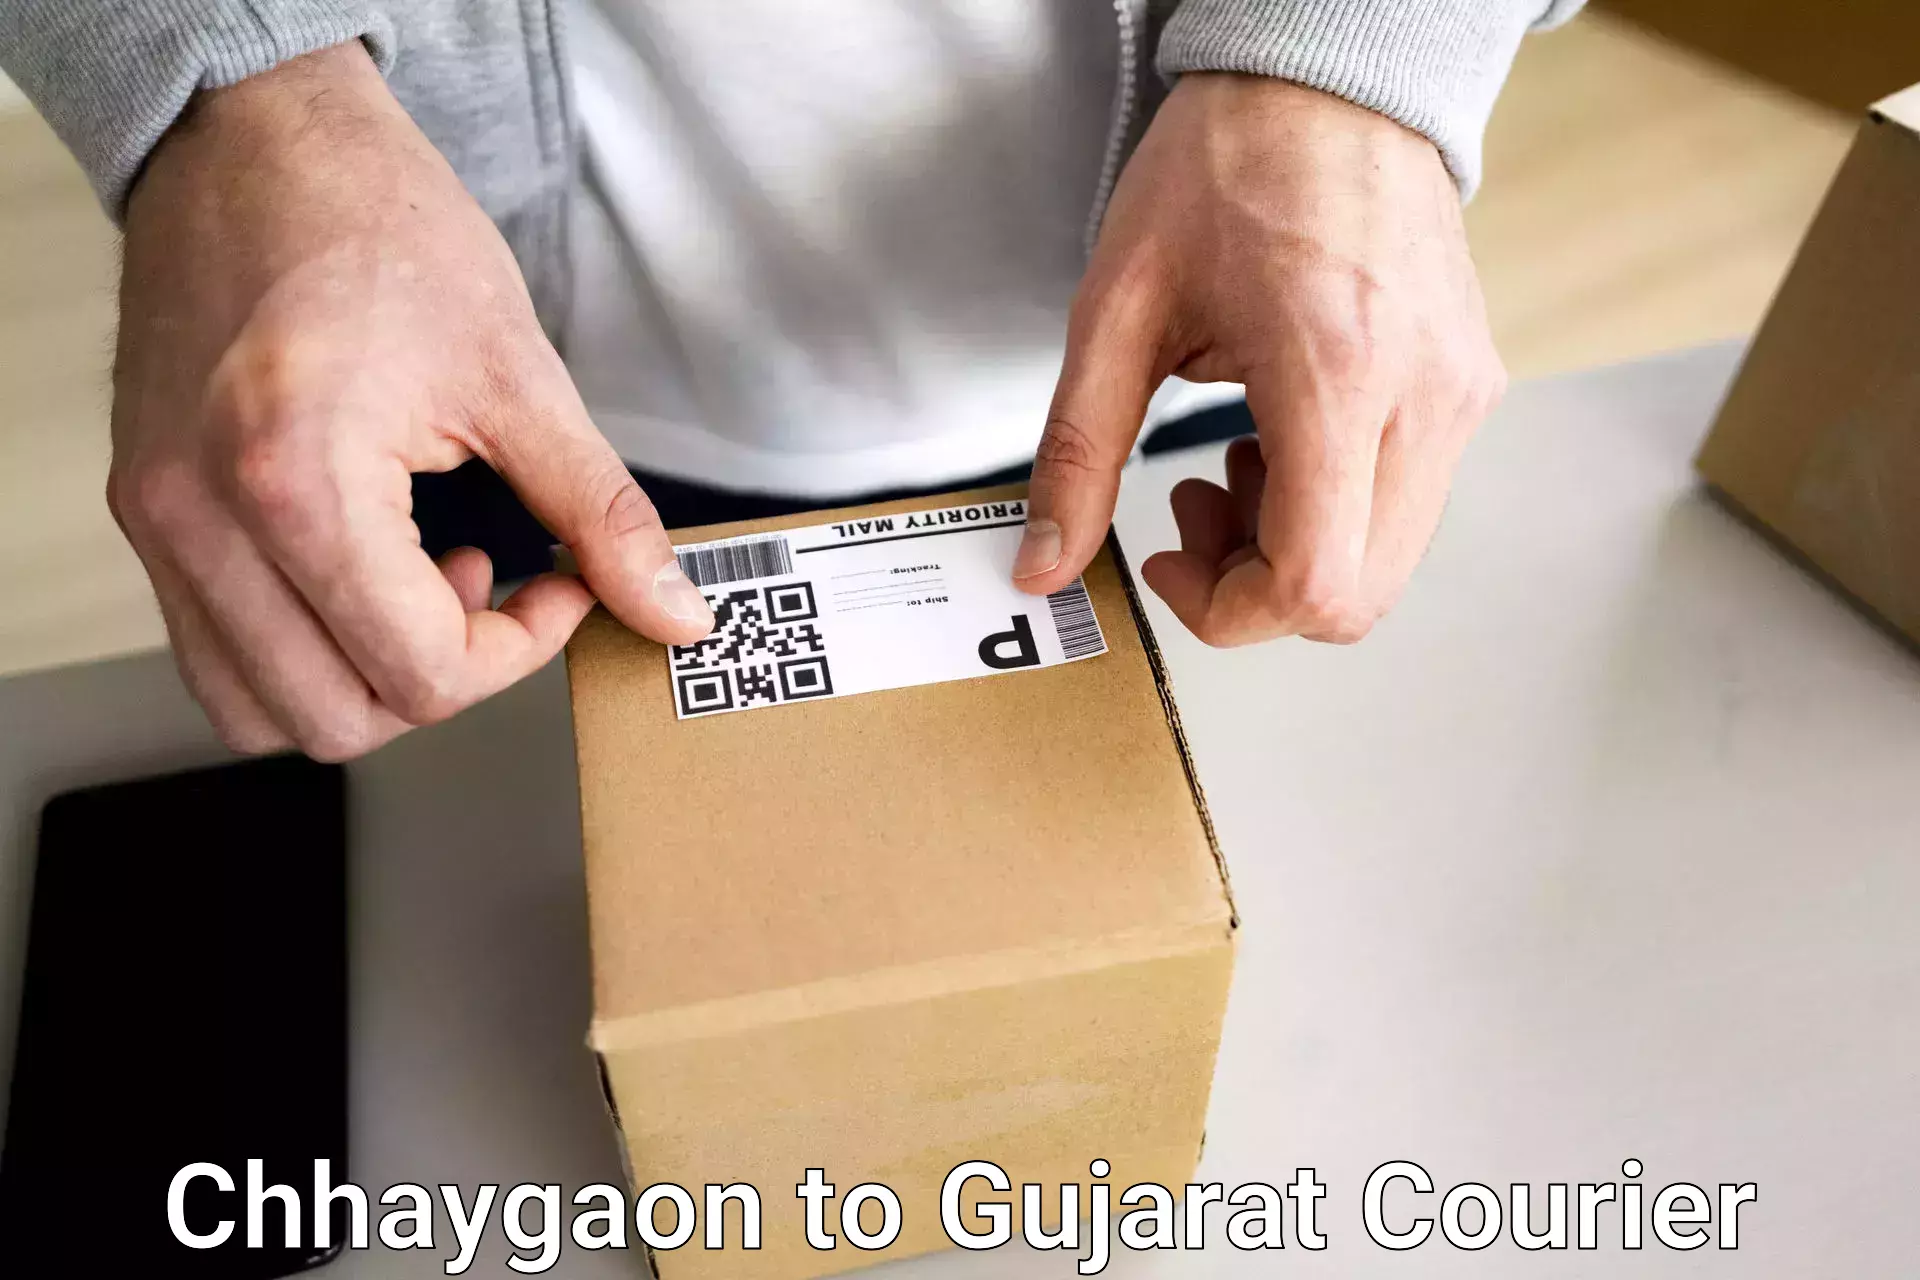 Baggage transport services Chhaygaon to Ahmedabad